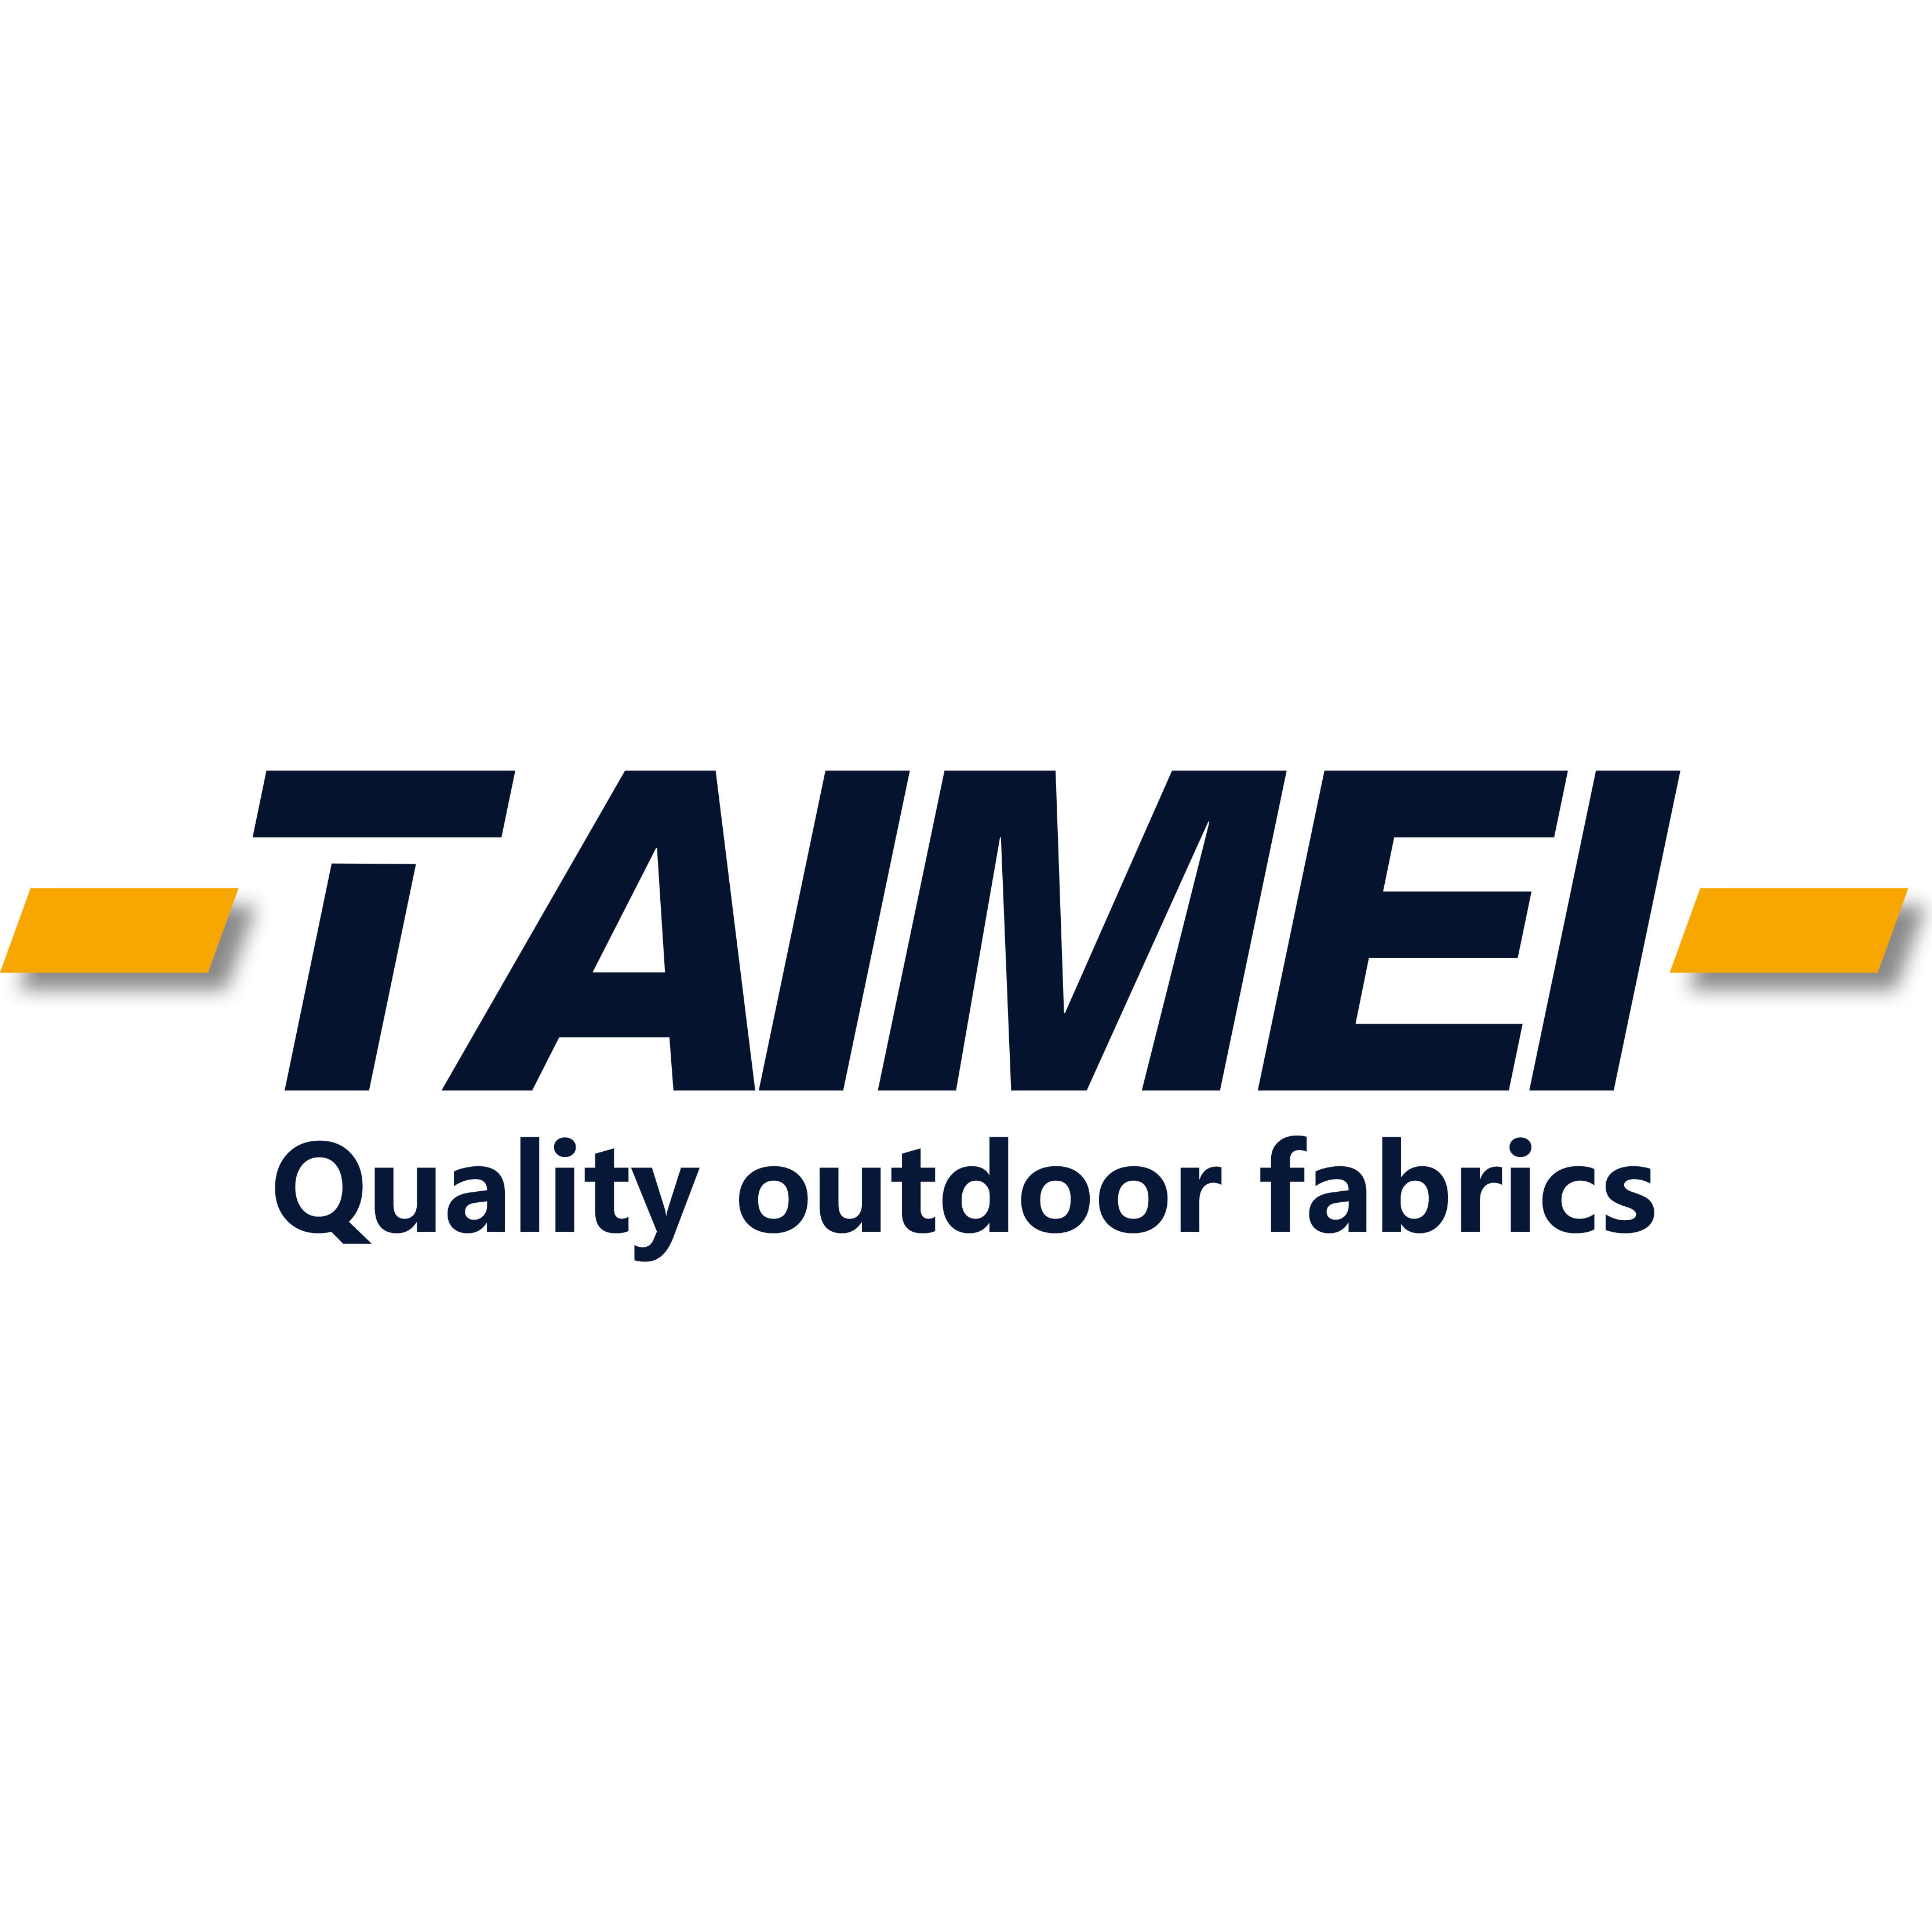 what-is-gsm-and-oz-how-to-conver-the-oz-to-gsm-taimei-tarpaulin-shade-fabric-manufacturer-faq